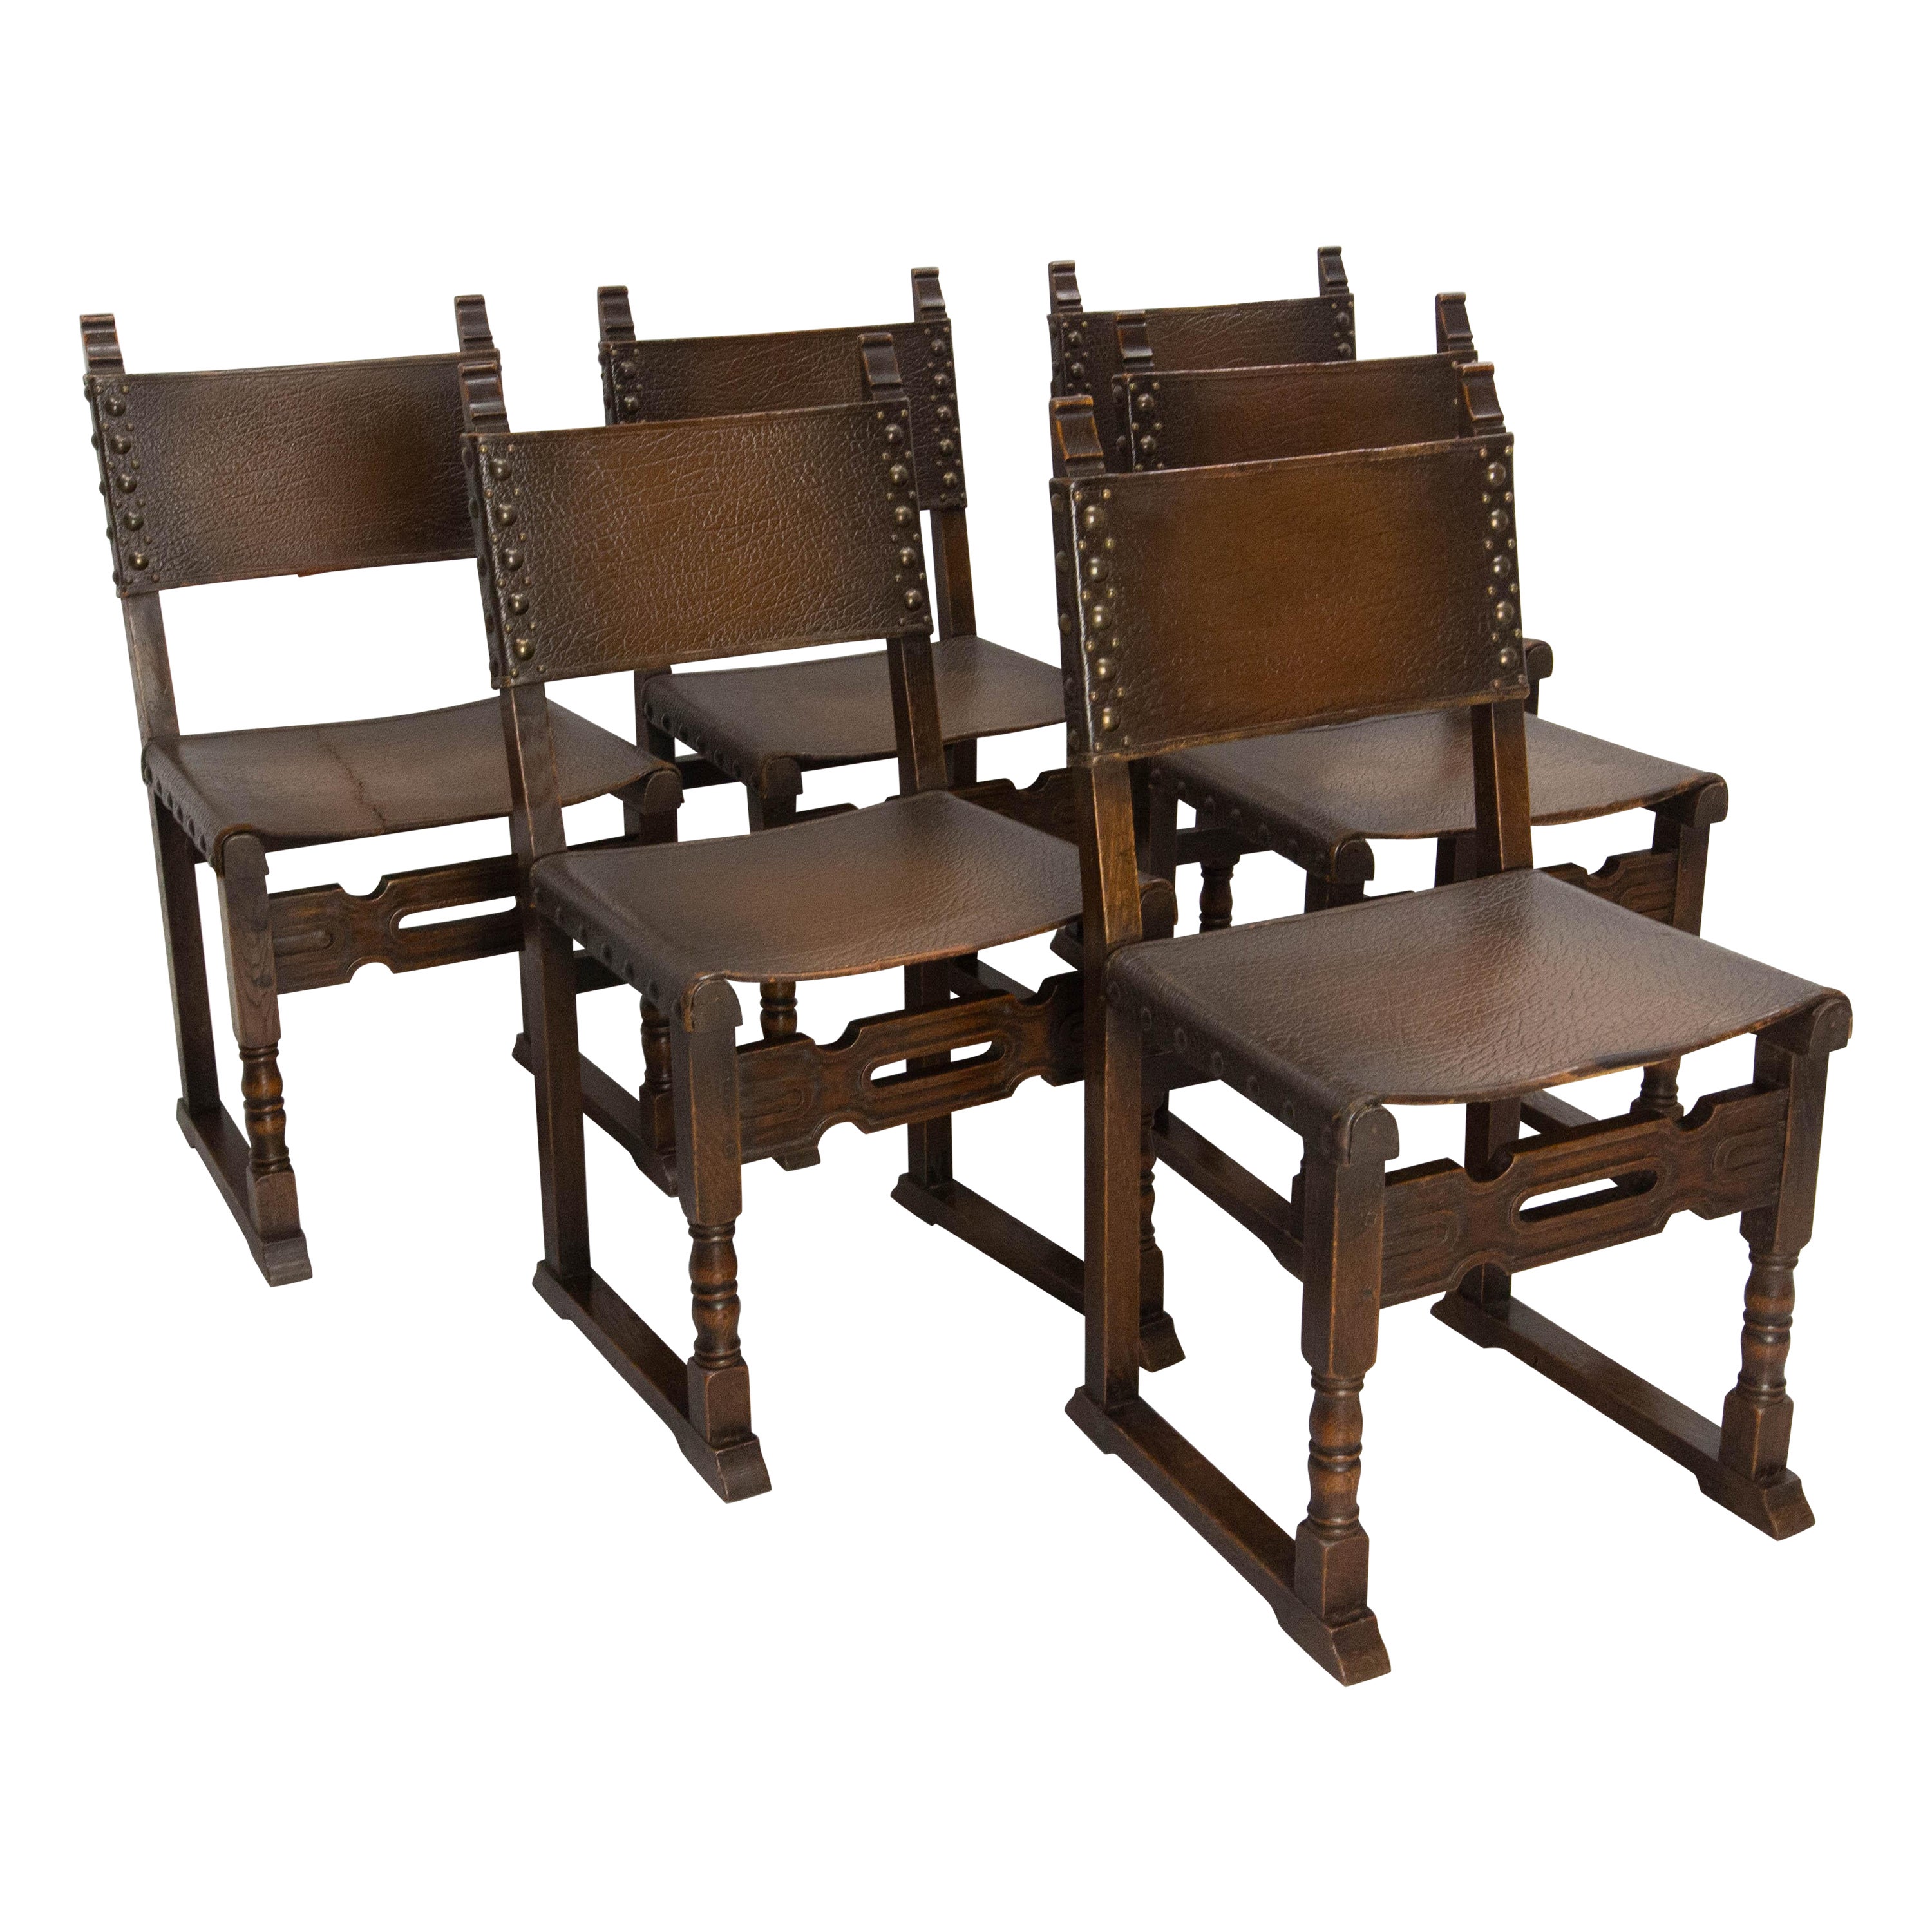 Six Dining Chairs Antique Mid-20th Century Spanish Studs Leather & Chestnut